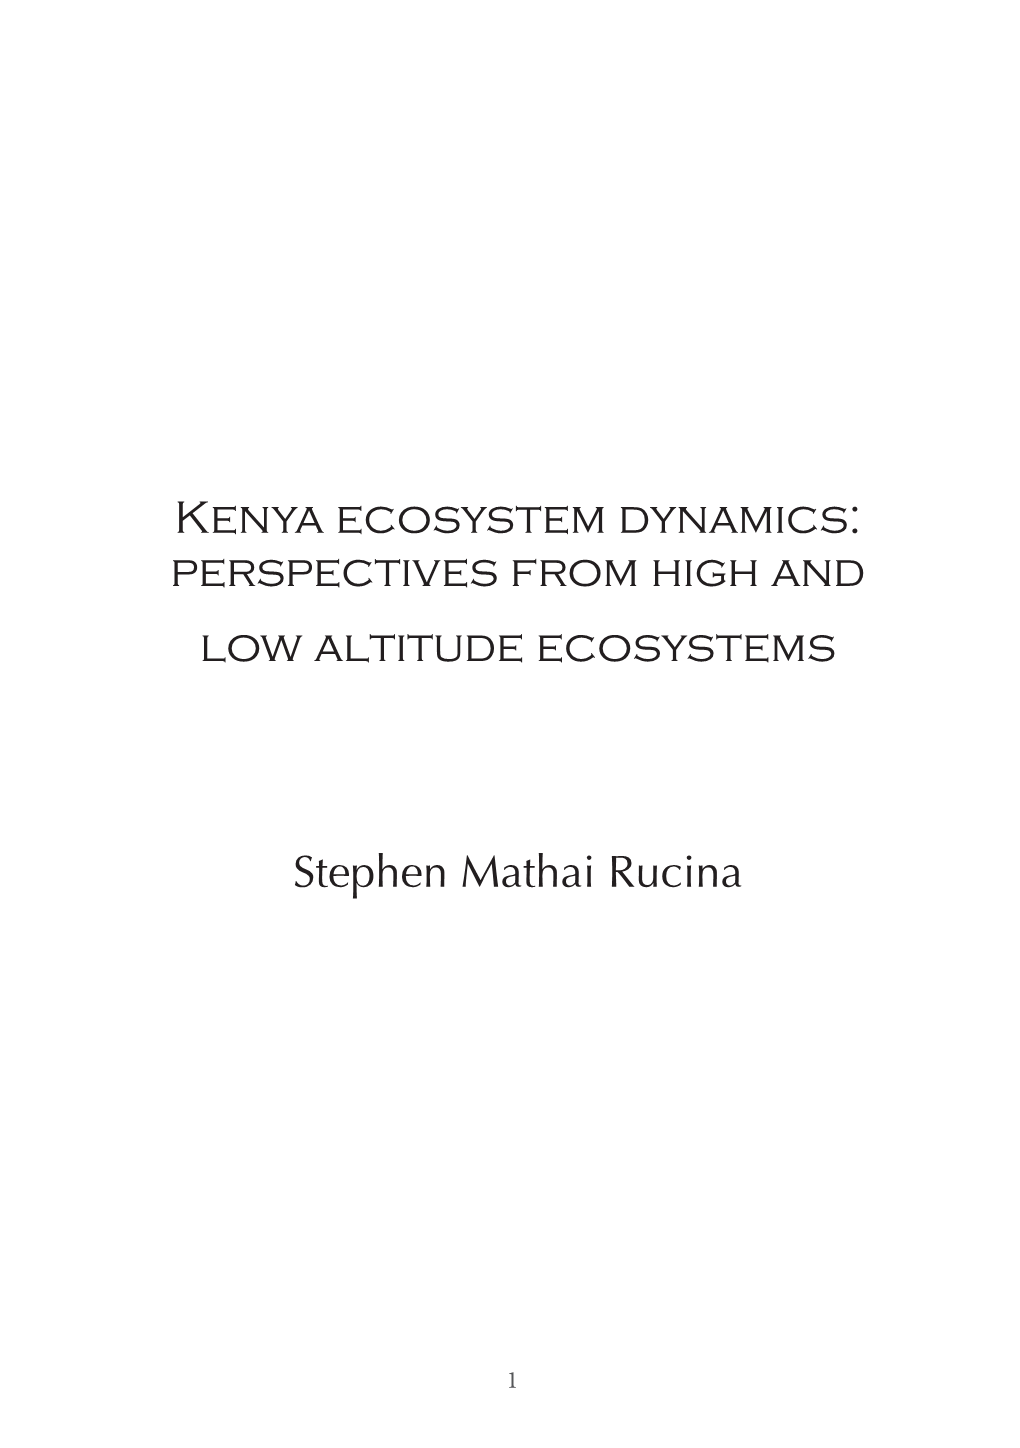 Kenya Ecosystem Dynamics: Perspectives from High and Low Altitude Ecosystems